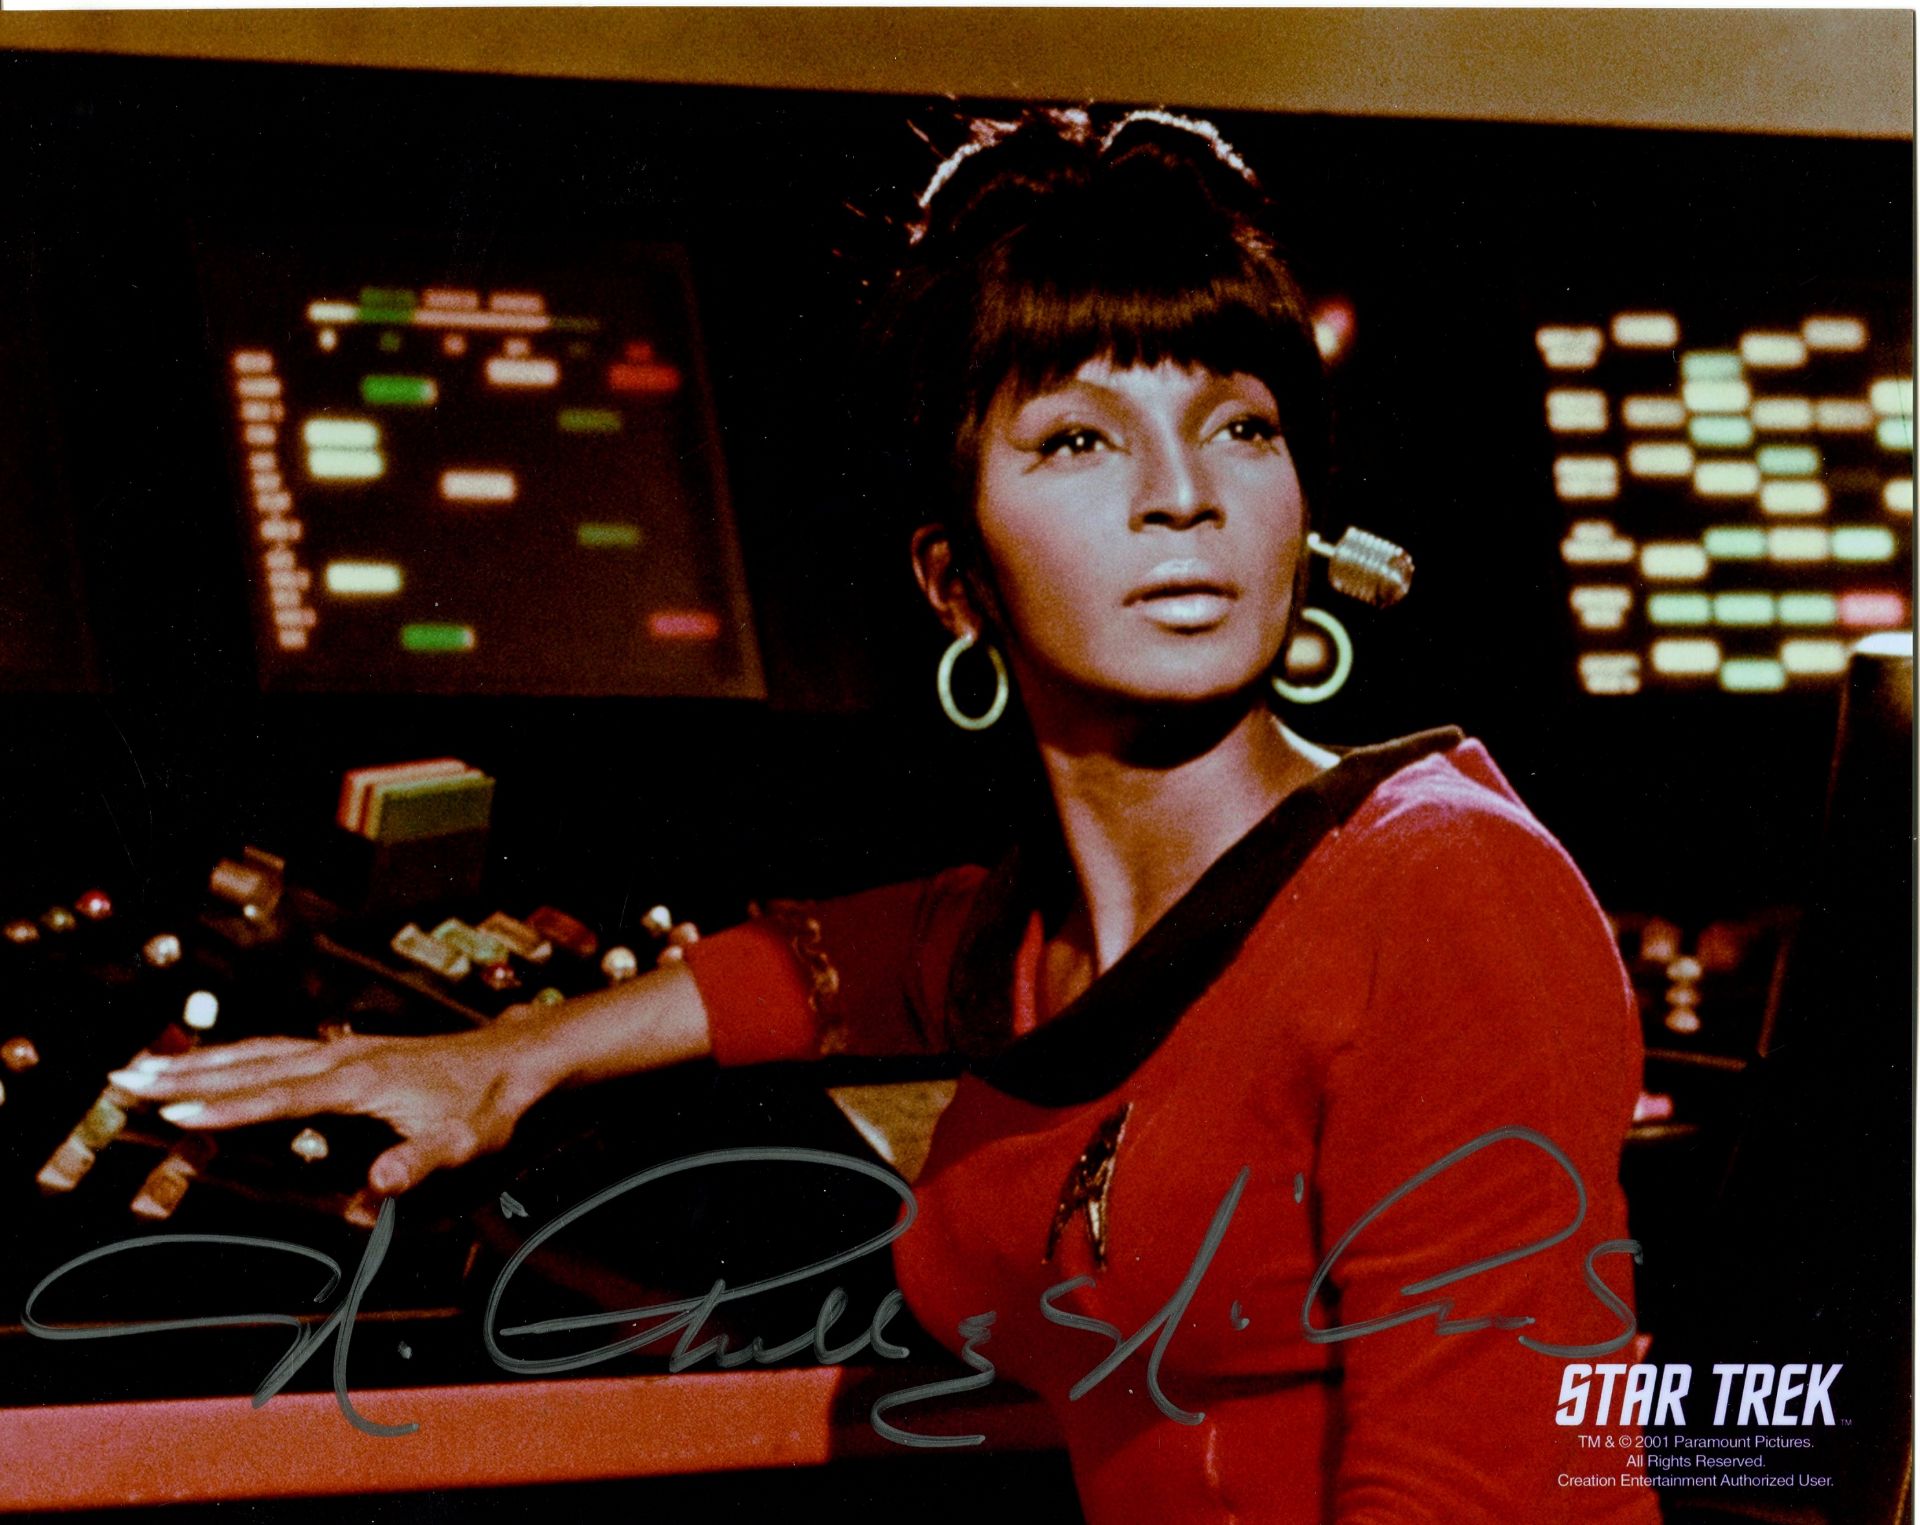 STAR TREK: Small selection of signed colour 10 x 8 photographs by various actors who starred in - Image 2 of 4